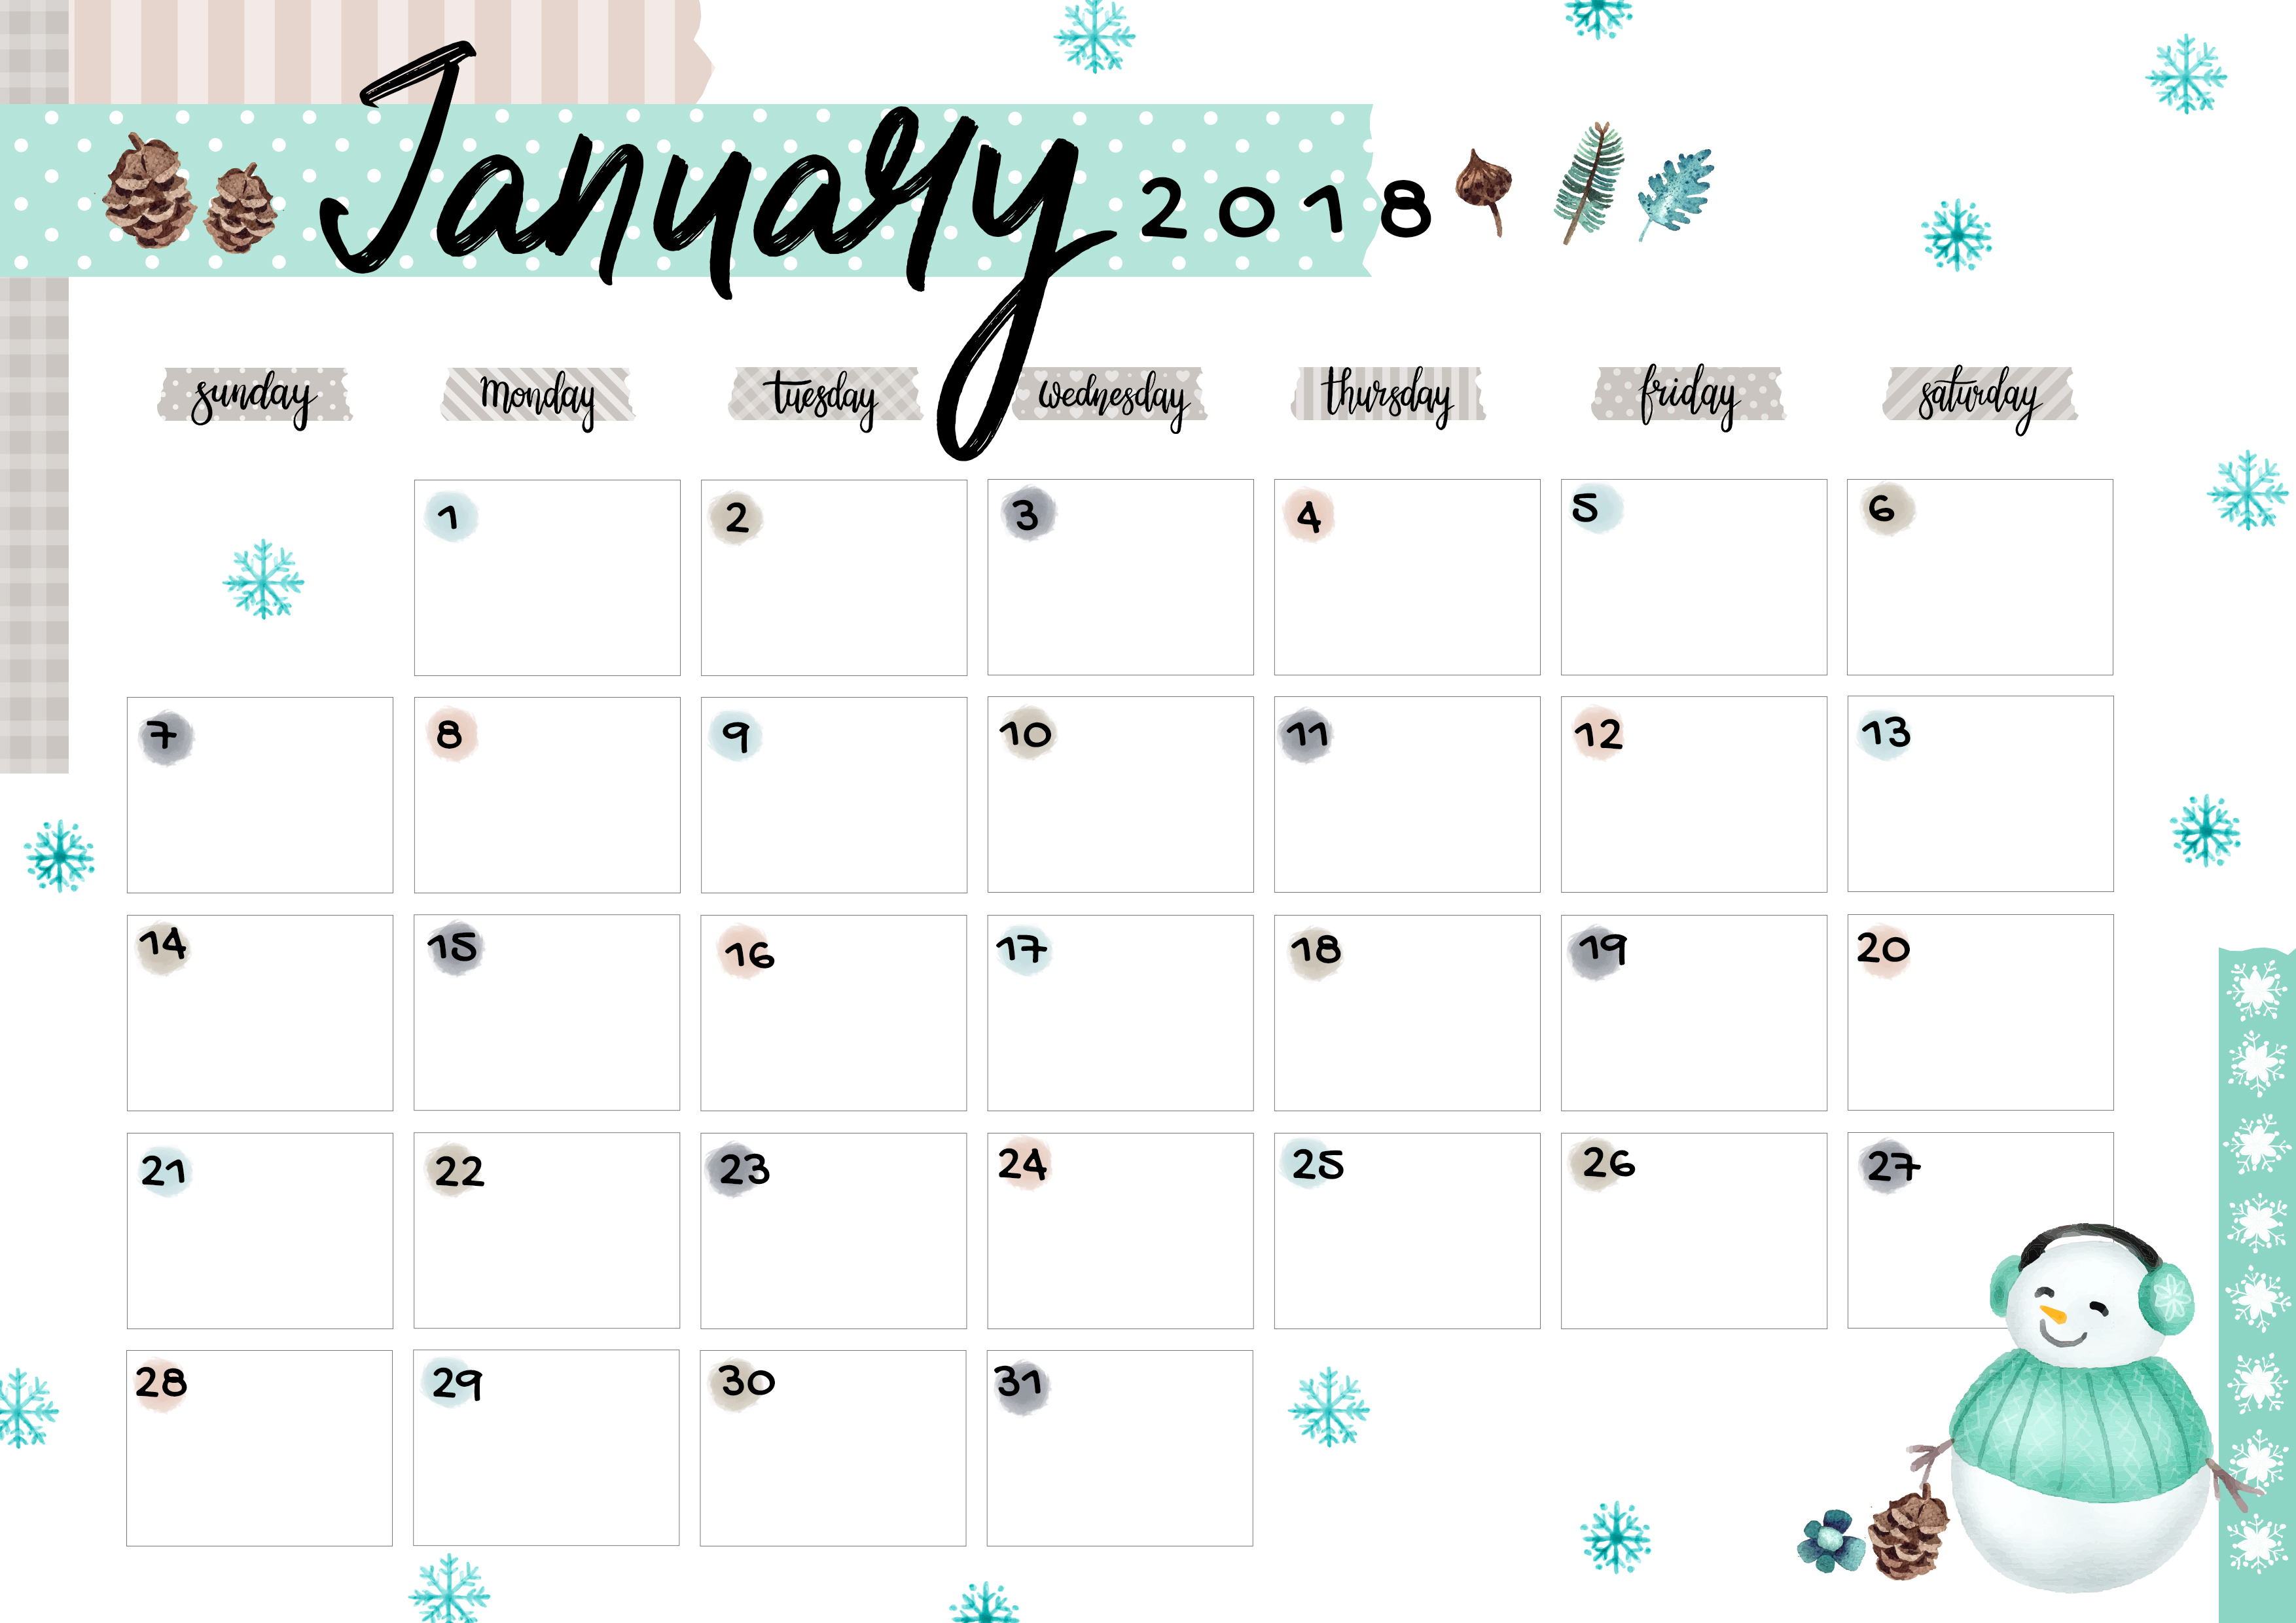 January 2018 Printable Colorful Calendar – Free Download | Colorful Zone